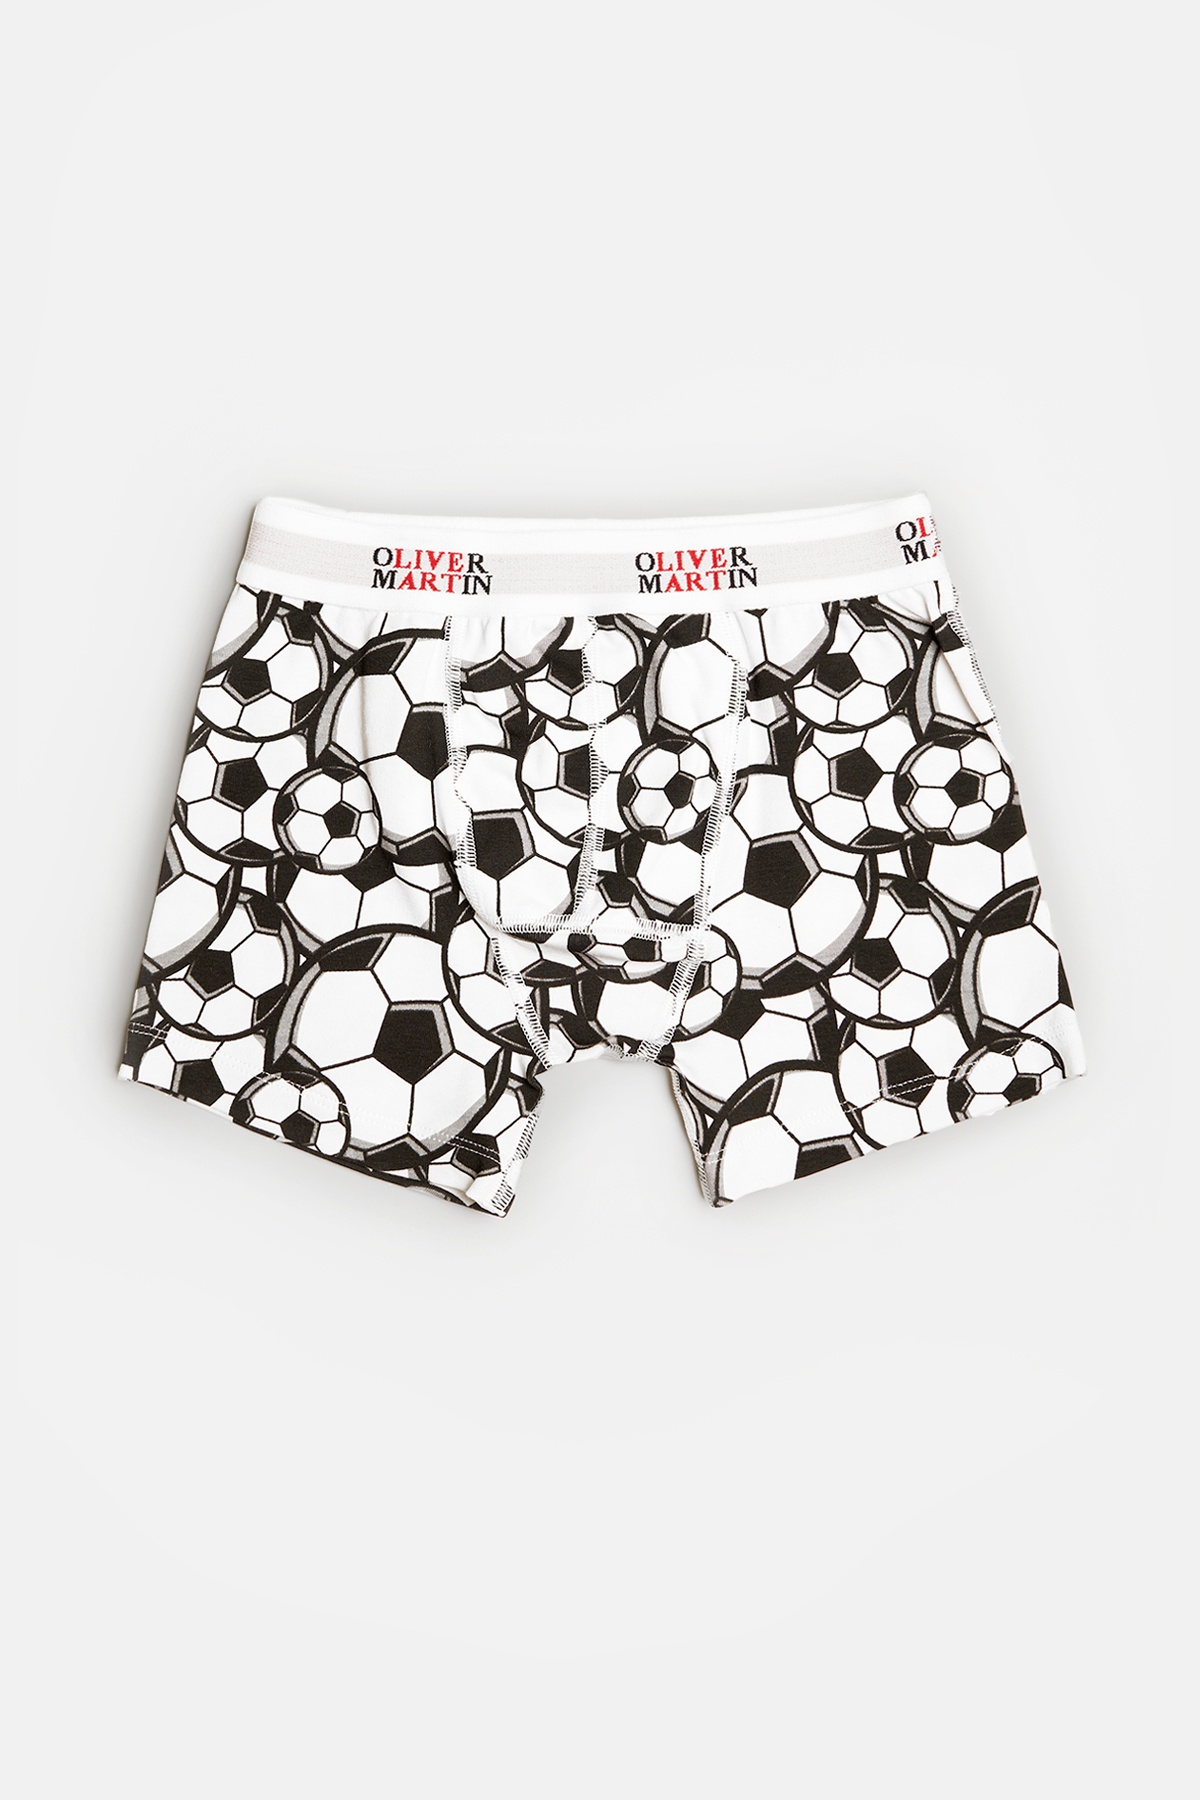 https://olivermartinkids.com/images/products/20201206153623boxershorts_underwear_boys_football_cotton_1.jpg